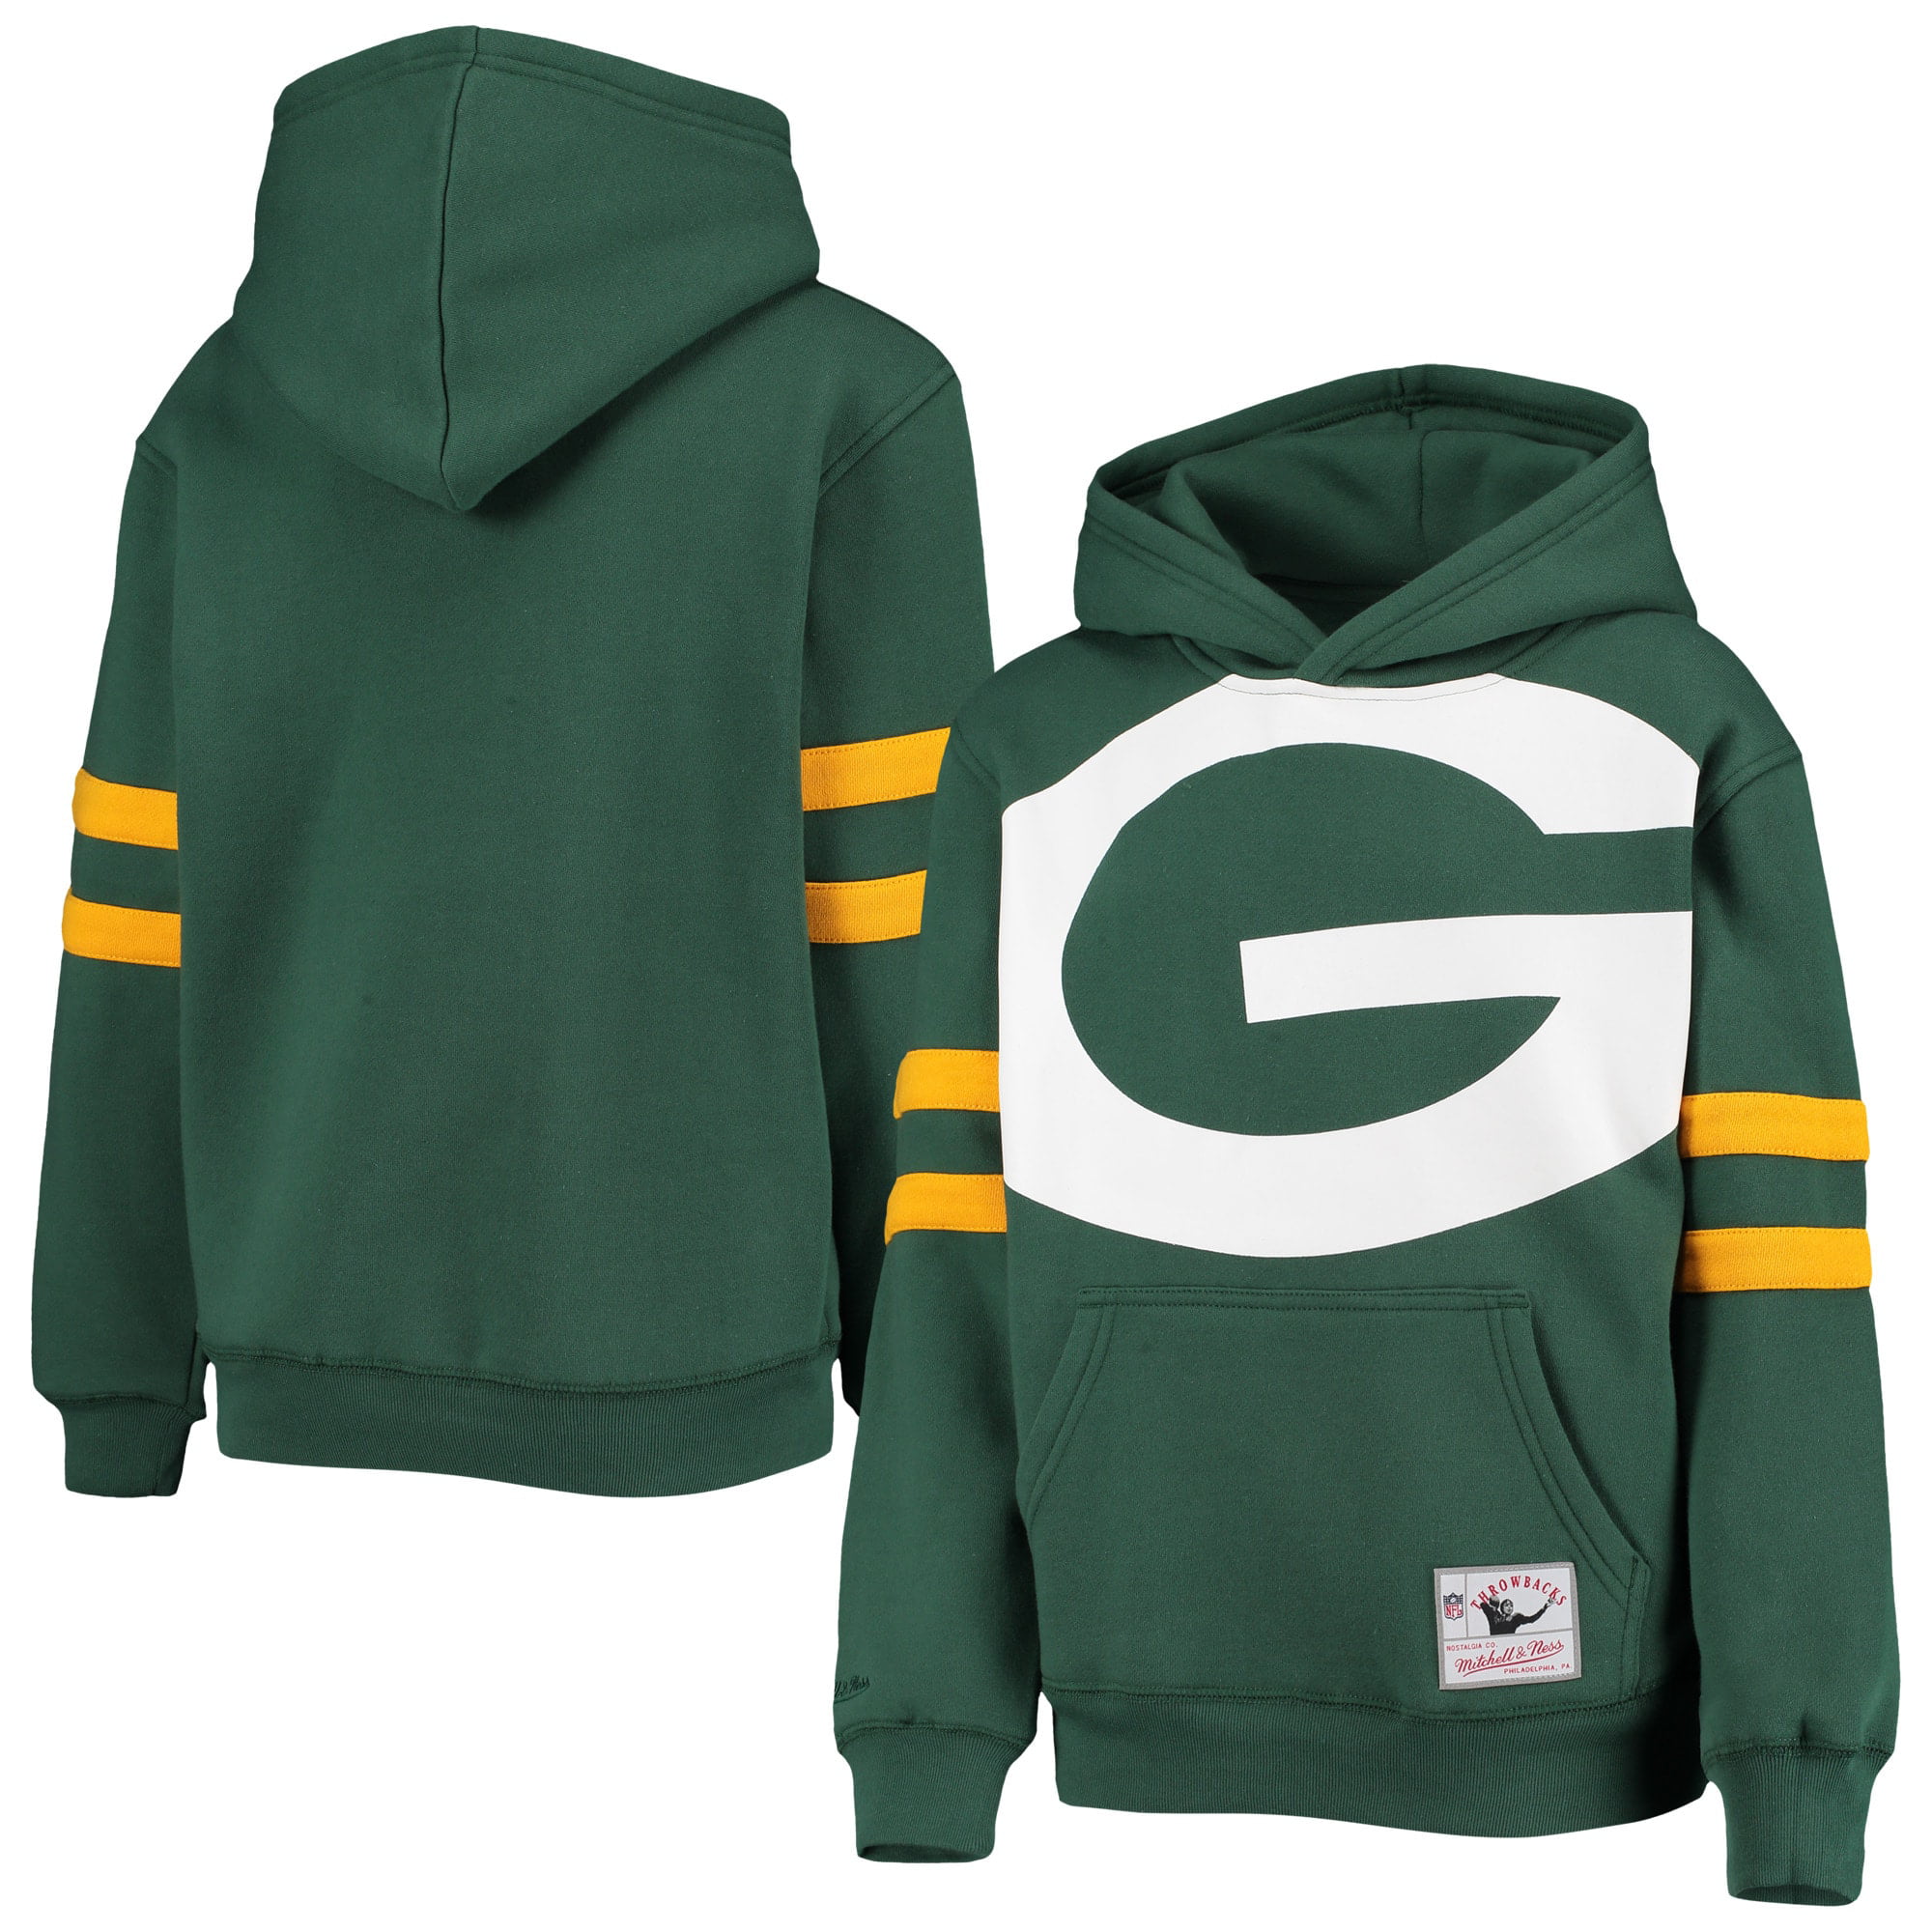 Sporty hoodie Green Bay Packers Jacket  Zip up Autumn Sweater Tops